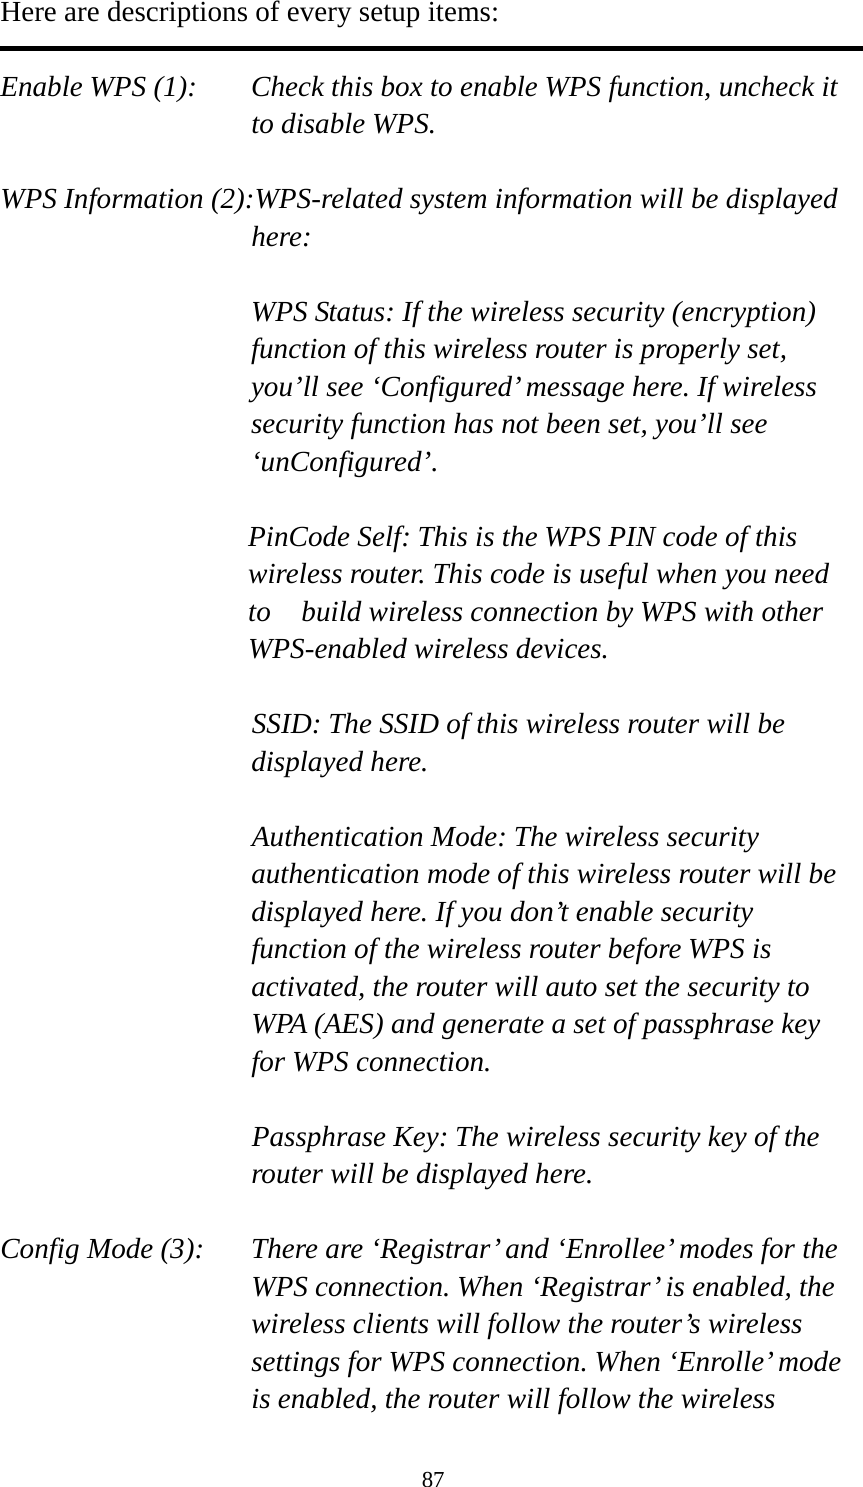 87 Here are descriptions of every setup items:  Enable WPS (1):  Check this box to enable WPS function, uncheck it to disable WPS.  WPS Information (2):WPS-related system information will be displayed here:  WPS Status: If the wireless security (encryption) function of this wireless router is properly set, you’ll see ‘Configured’ message here. If wireless security function has not been set, you’ll see ‘unConfigured’.  PinCode Self: This is the WPS PIN code of this wireless router. This code is useful when you need to    build wireless connection by WPS with other WPS-enabled wireless devices.  SSID: The SSID of this wireless router will be displayed here.  Authentication Mode: The wireless security authentication mode of this wireless router will be displayed here. If you don’t enable security function of the wireless router before WPS is activated, the router will auto set the security to WPA (AES) and generate a set of passphrase key for WPS connection.  Passphrase Key: The wireless security key of the router will be displayed here.  Config Mode (3):  There are ‘Registrar’ and ‘Enrollee’ modes for the WPS connection. When ‘Registrar’ is enabled, the wireless clients will follow the router’s wireless settings for WPS connection. When ‘Enrolle’ mode is enabled, the router will follow the wireless 